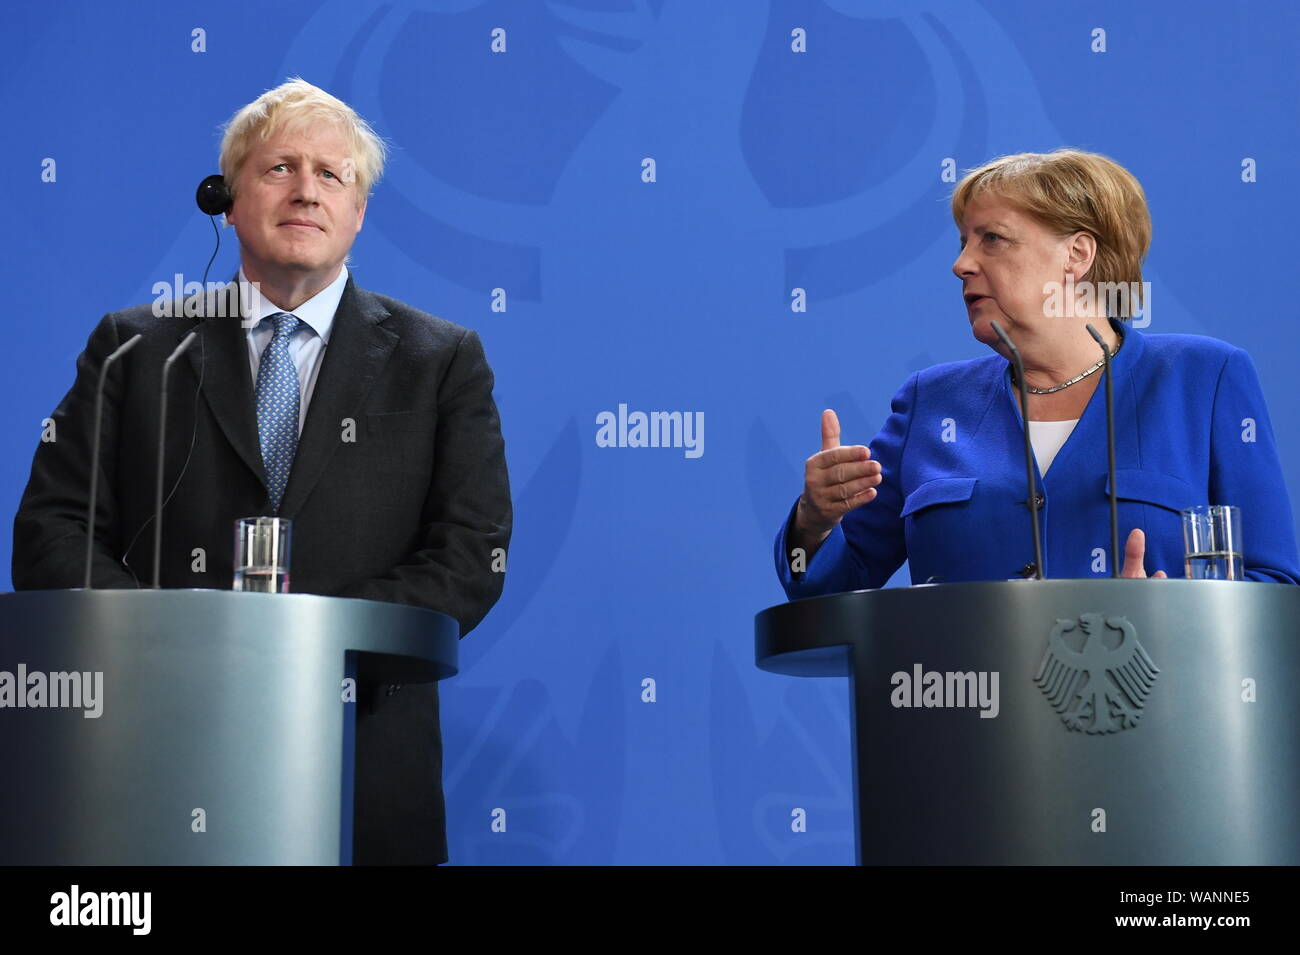 Prime Minister Boris Johnson holds a joint press conference with German Chancellor Angela Merkel in Berlin, ahead of talks to try to break the Brexit deadlock. Stock Photo